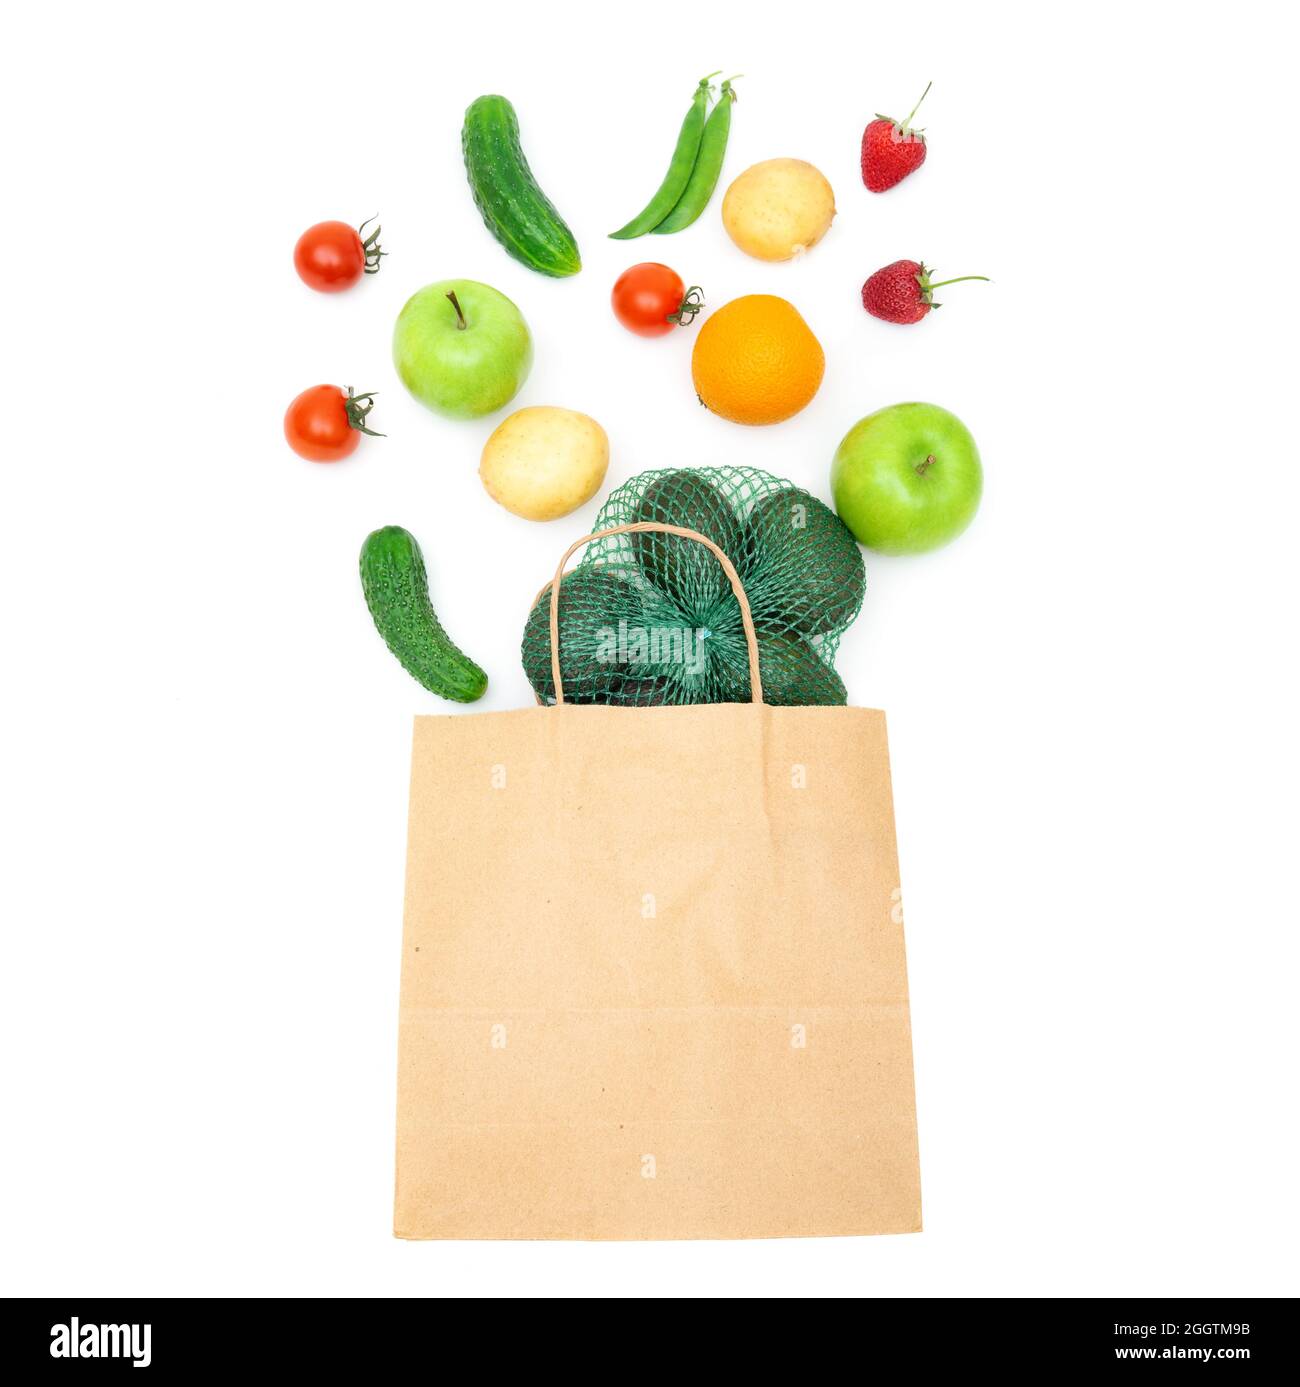 Assorted fruits and vegetables falling into a craft paper shopping bag isolated on white. Creative organic groceries flat lay. Stock Photo